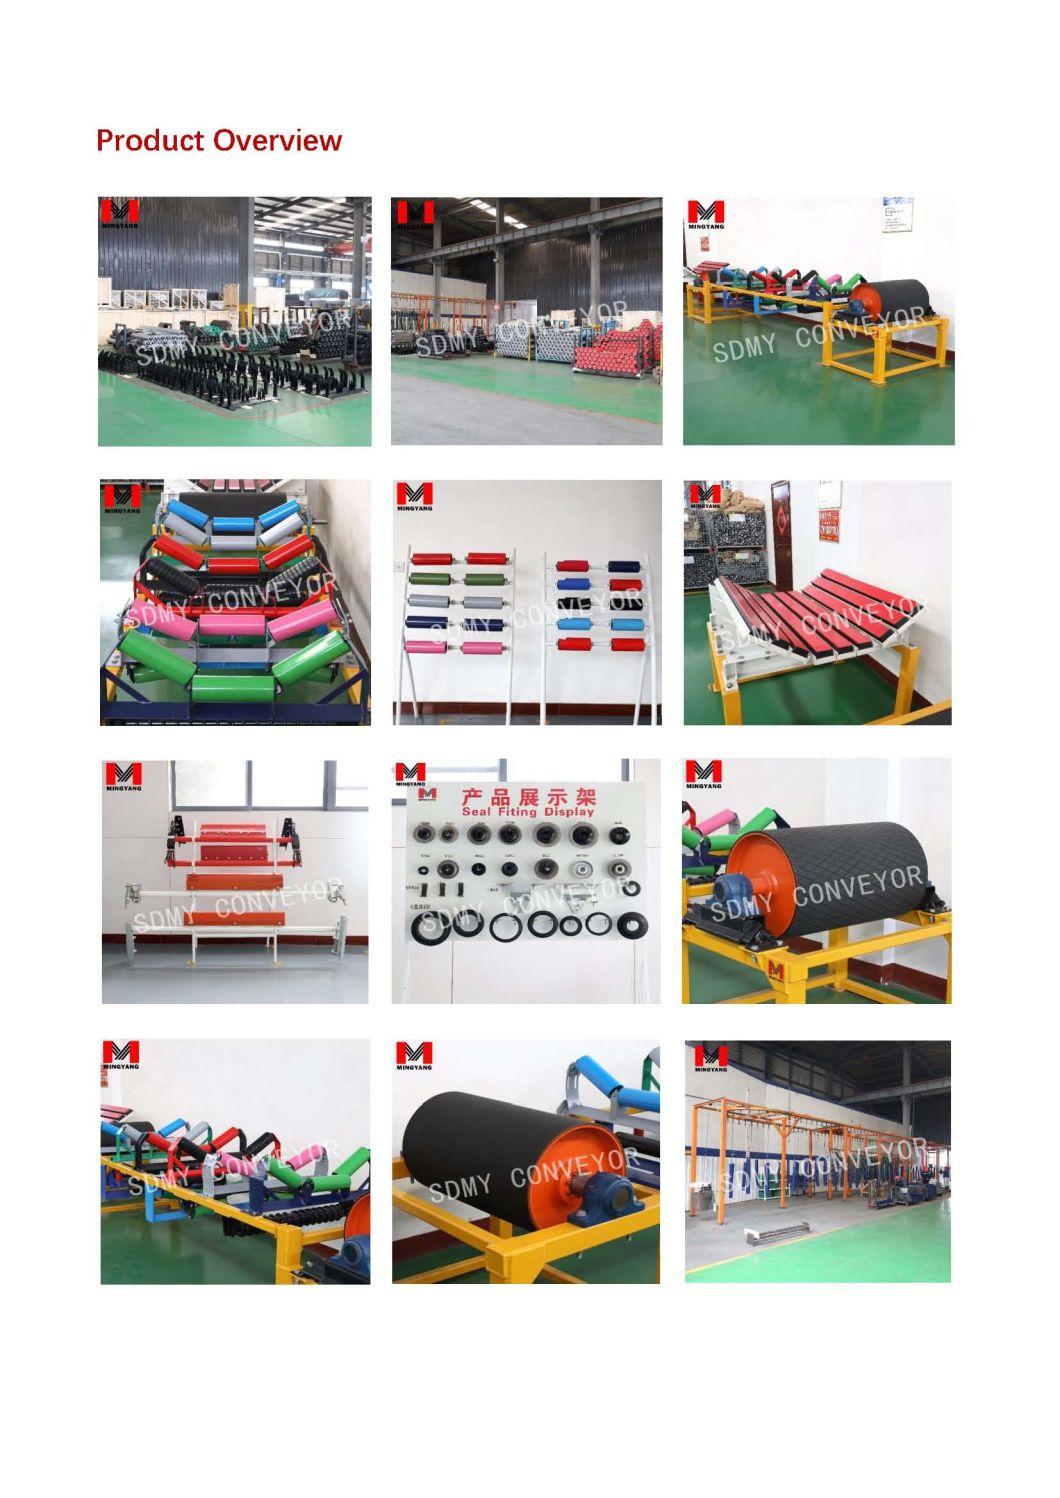 Belt Conveyor Steel Head Pulley with Different Surface